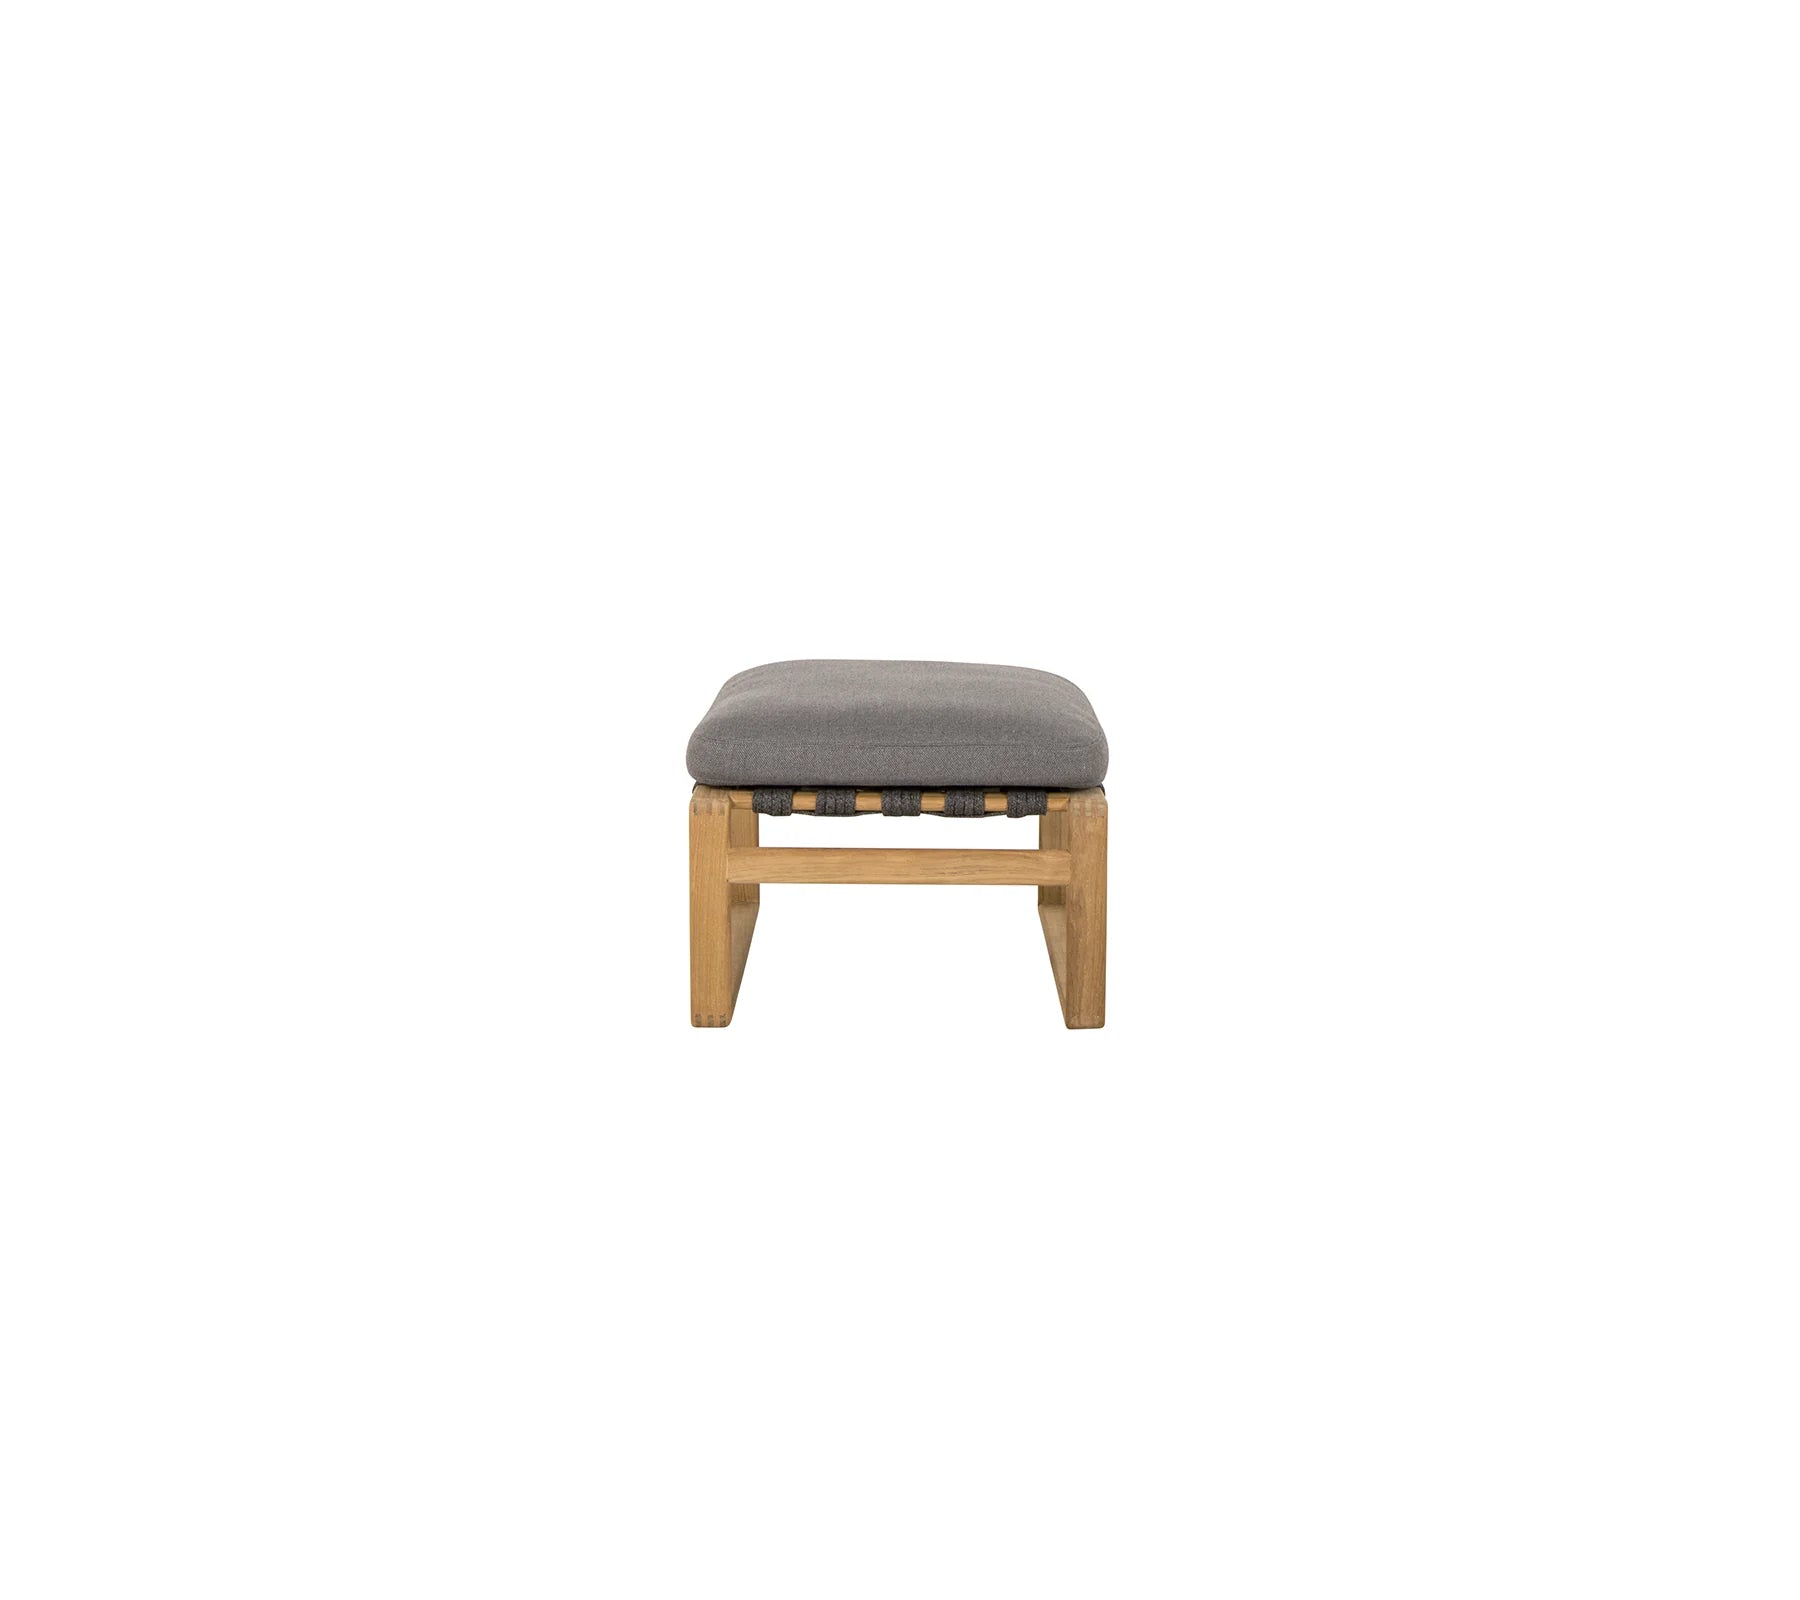 Boxhill's Endless Soft Outdoor Footstool in front view white background